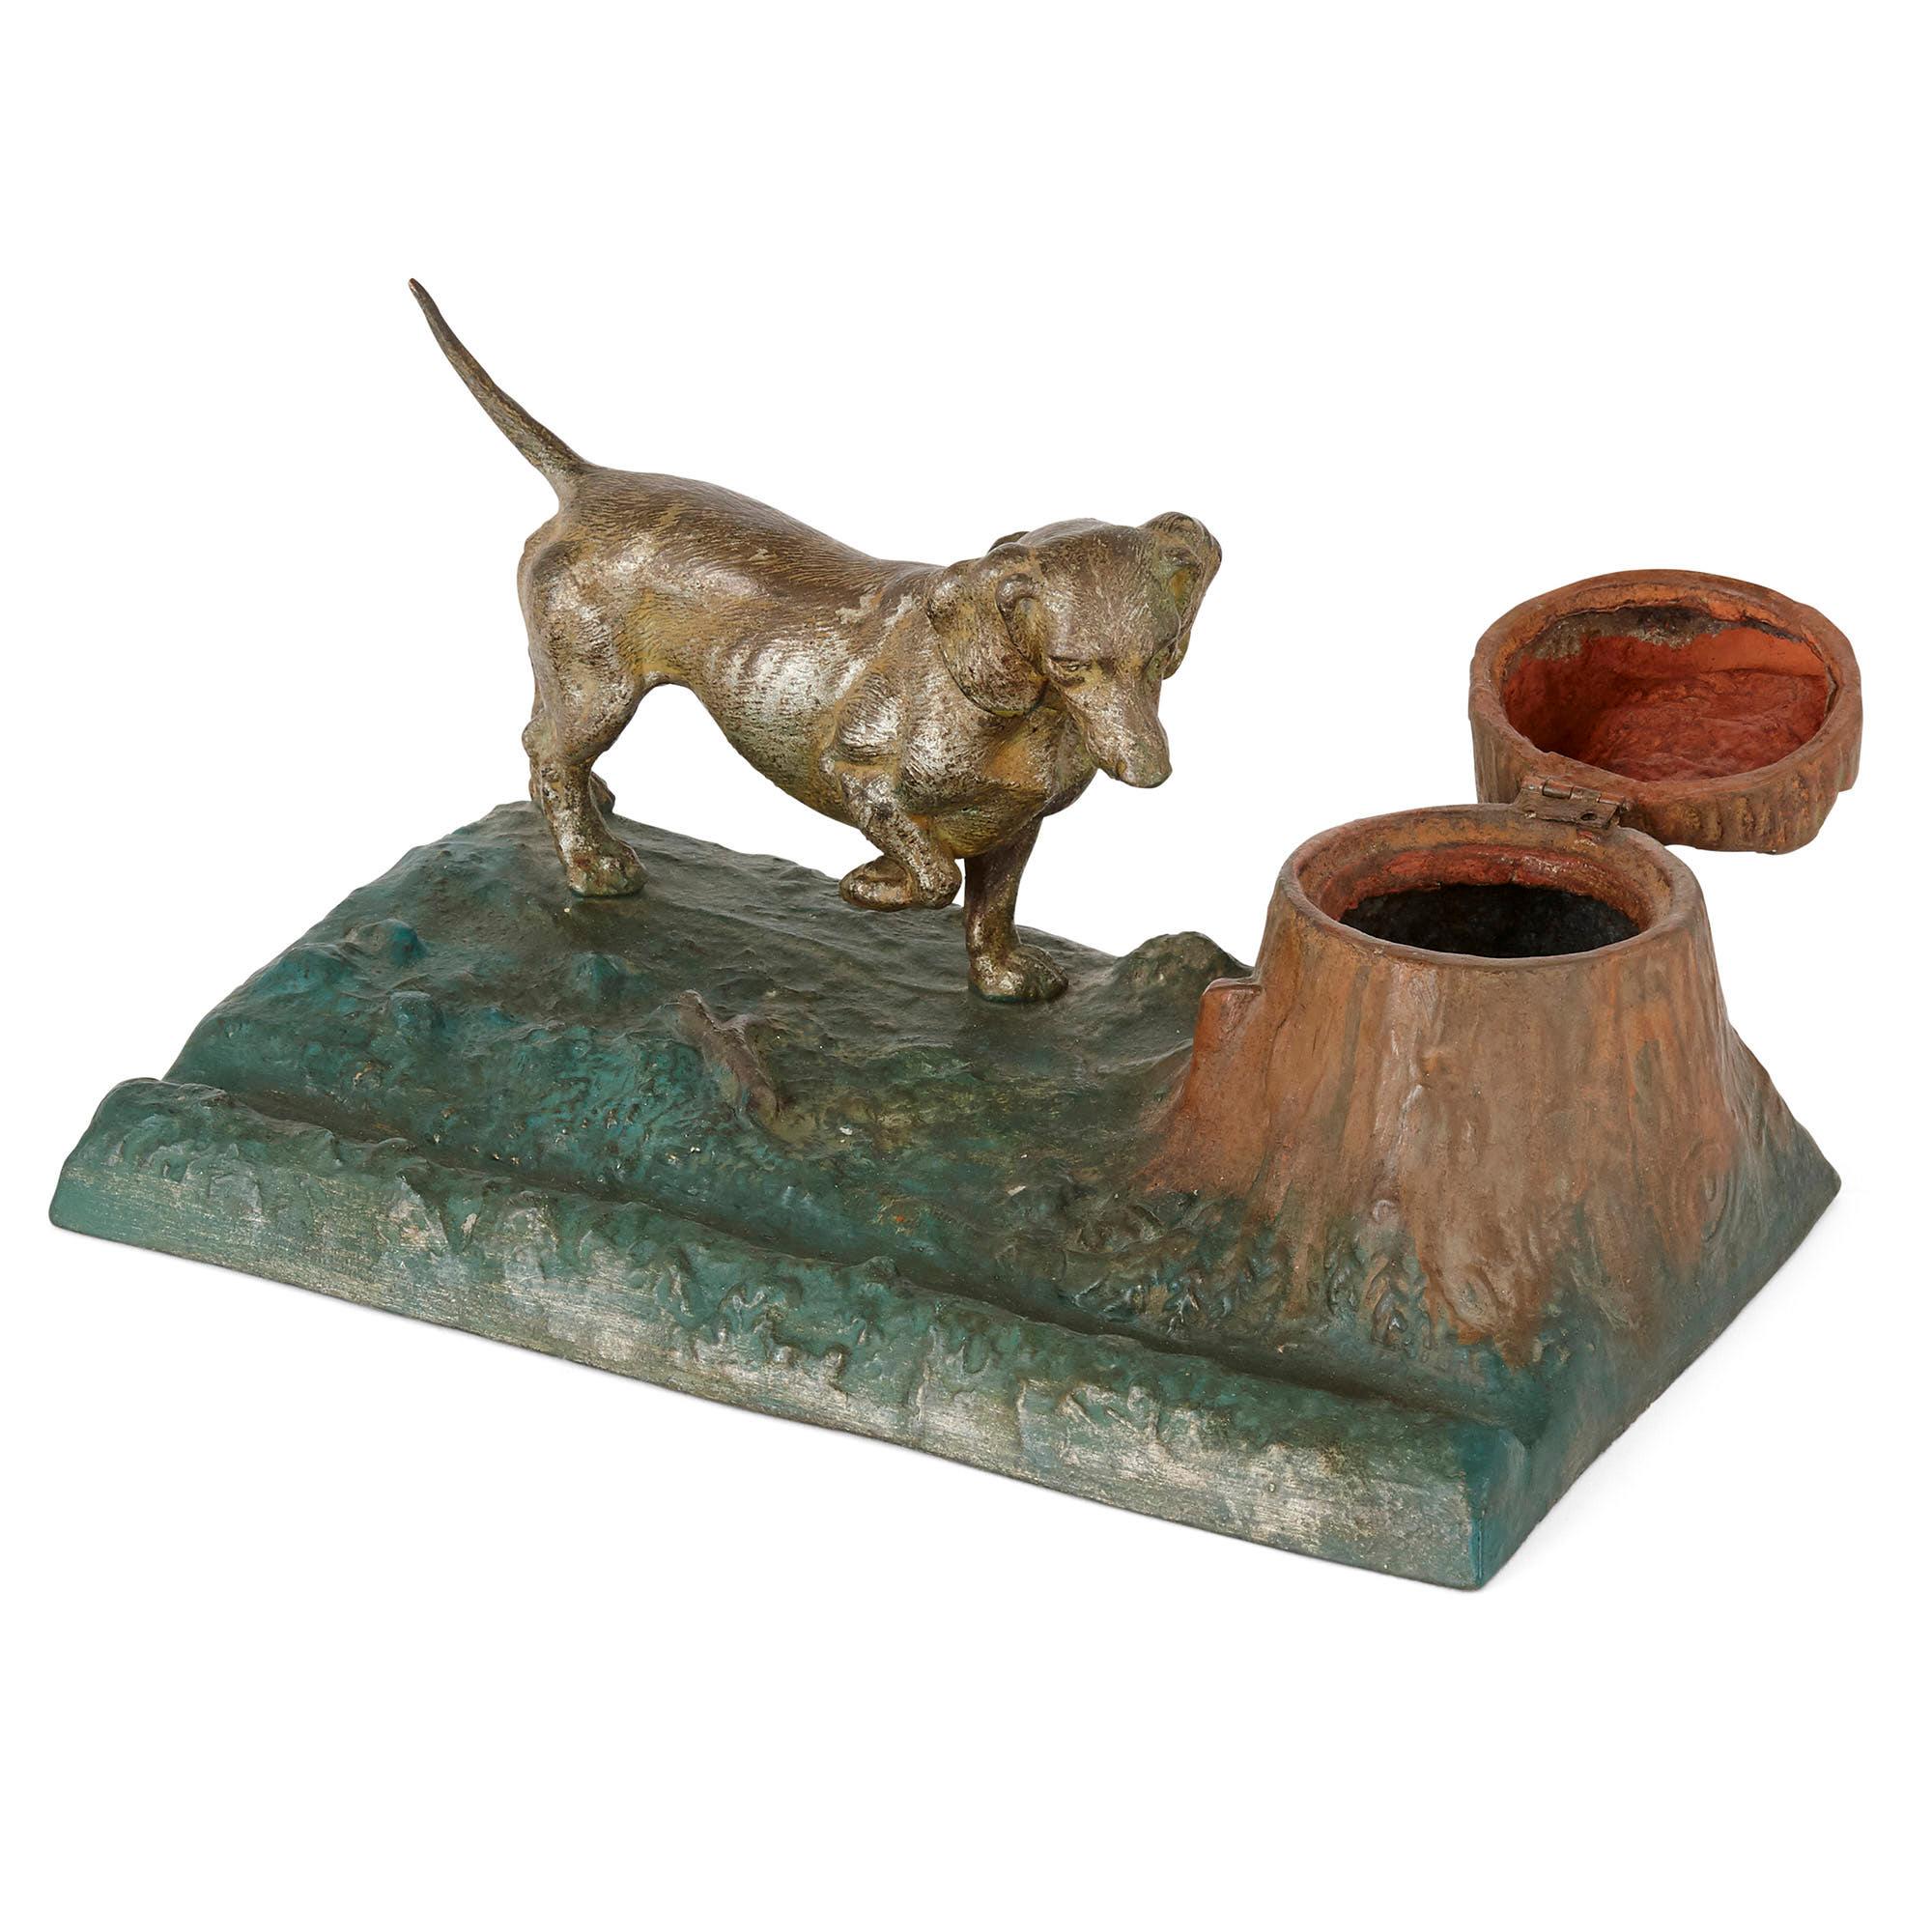 Eclectic collection of five Continental dog-form inkwells
Continental, circa 1900
Measures: Largest: Height 12cm, width 30cm, depth 18cm
Smallest: Height 10cm, diameter 7.5cm

This wonderful collection is comprised of five inkwells, each